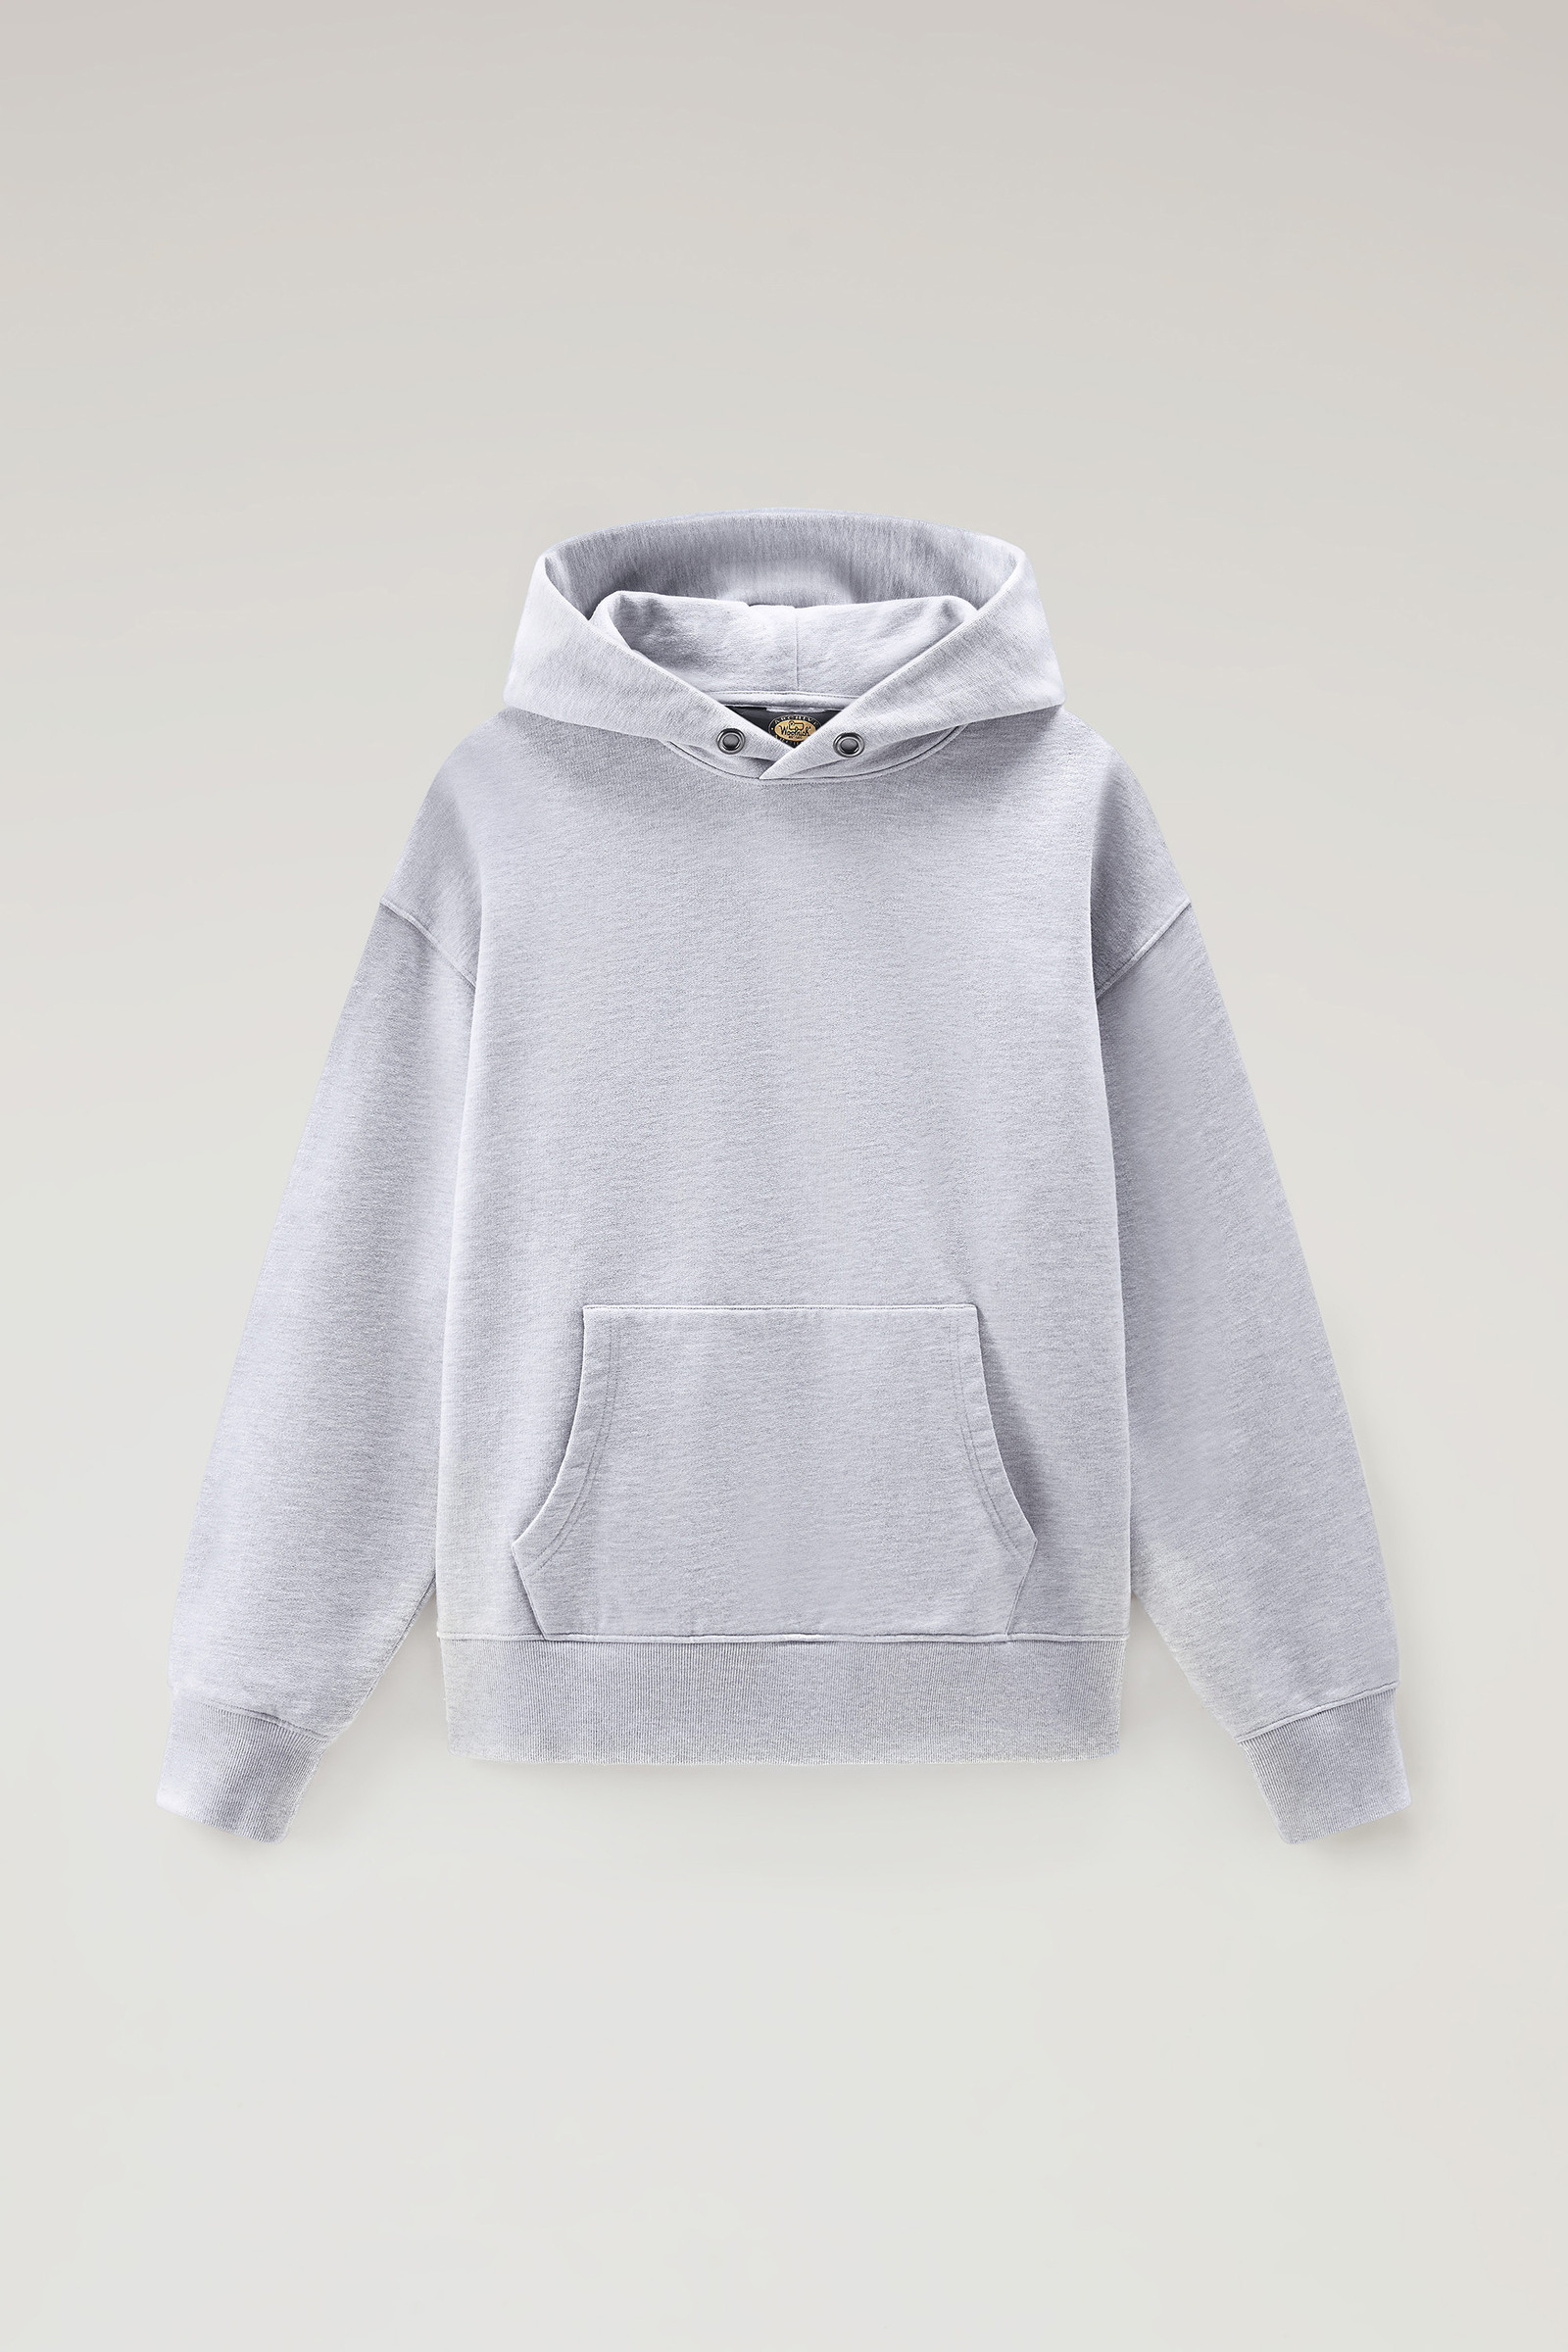 Men's Hoodie in Pure Cotton Grey | Woolrich USA